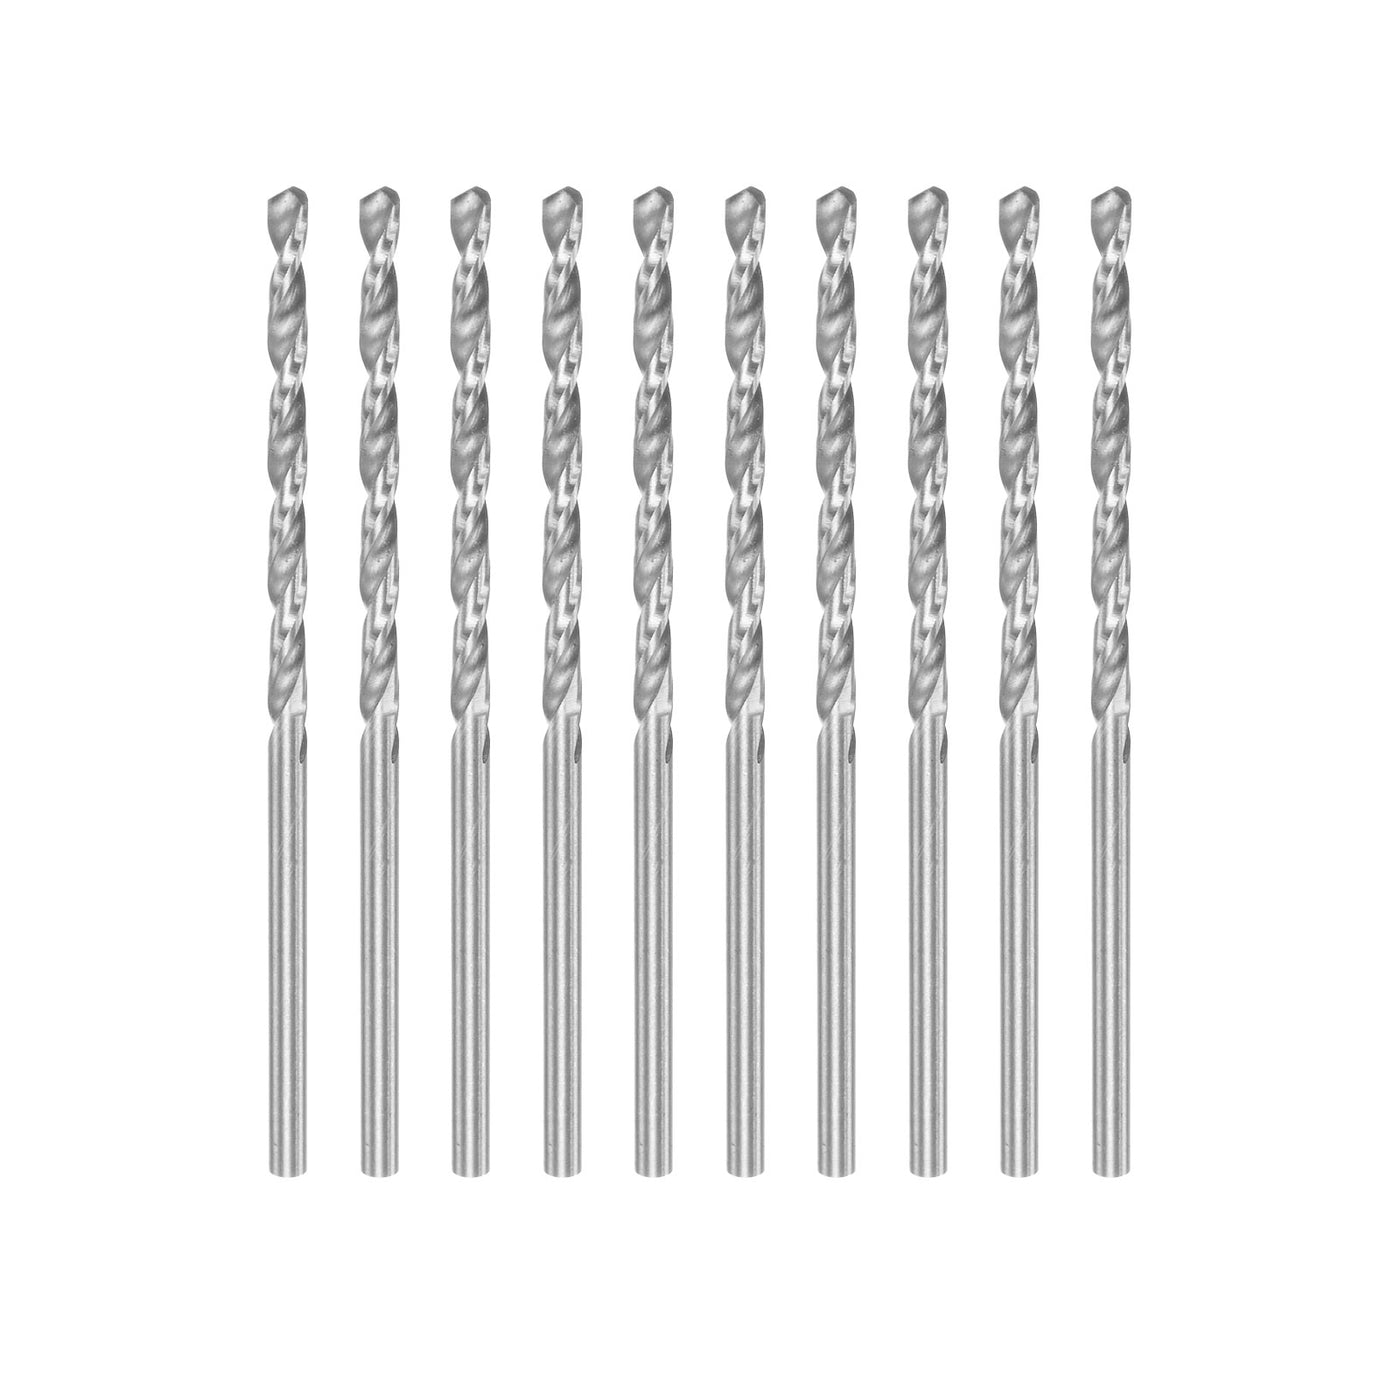 uxcell Uxcell 10 Pcs 2.1mm High Speed Steel Drill Bits, Fully Ground 55mm Length Drill Bit